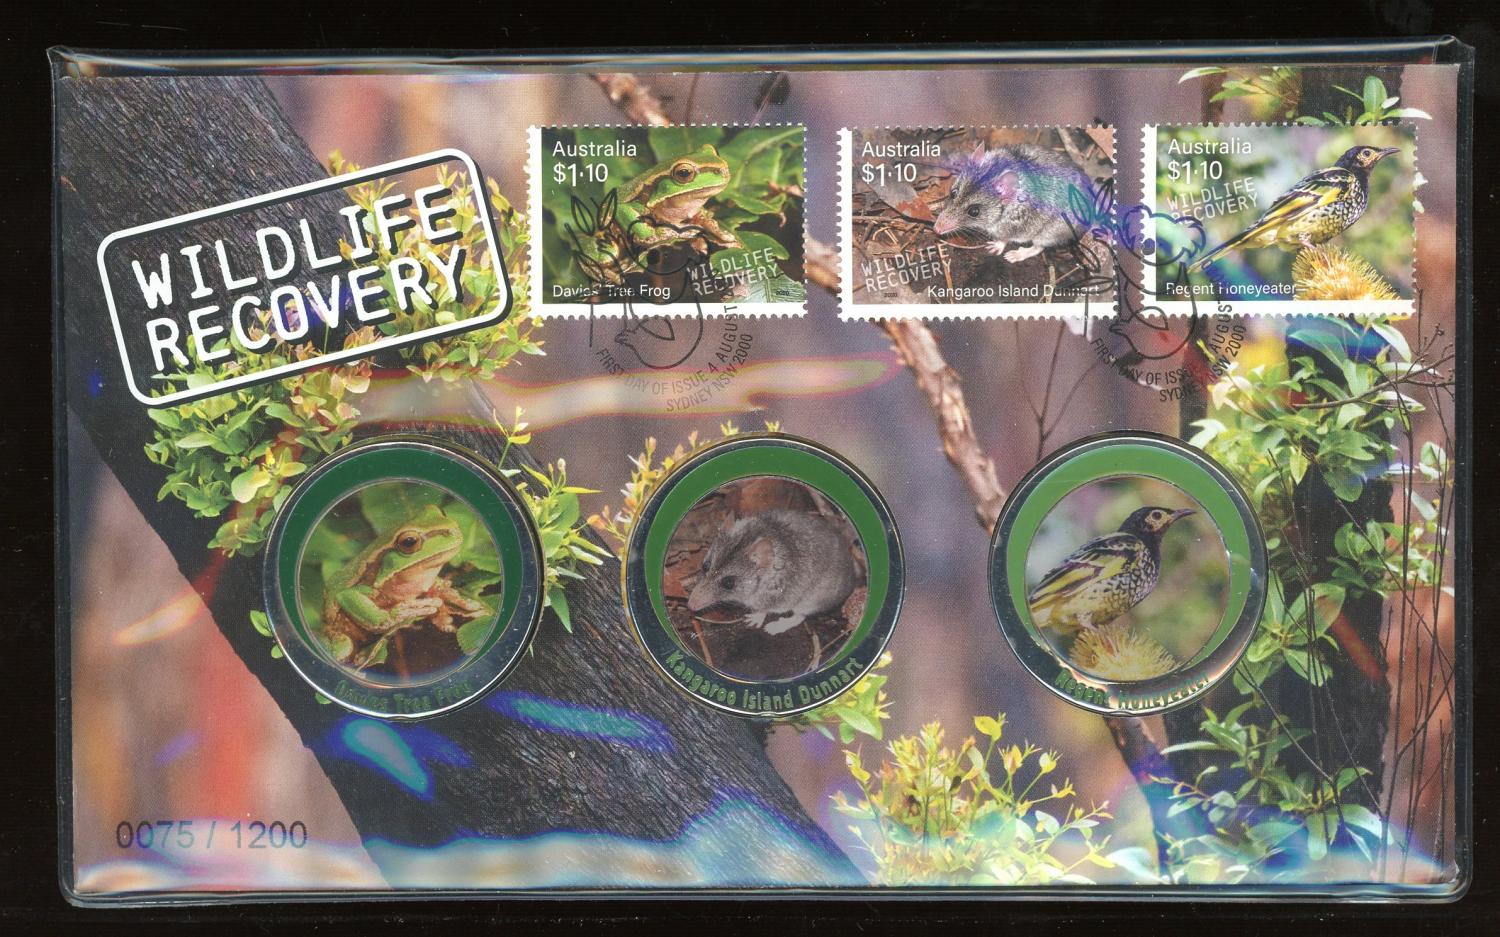 Thumbnail for 2020 Australian Wildlife Recovery 3 Medallion PNC Limited Edition 0075 - 1200